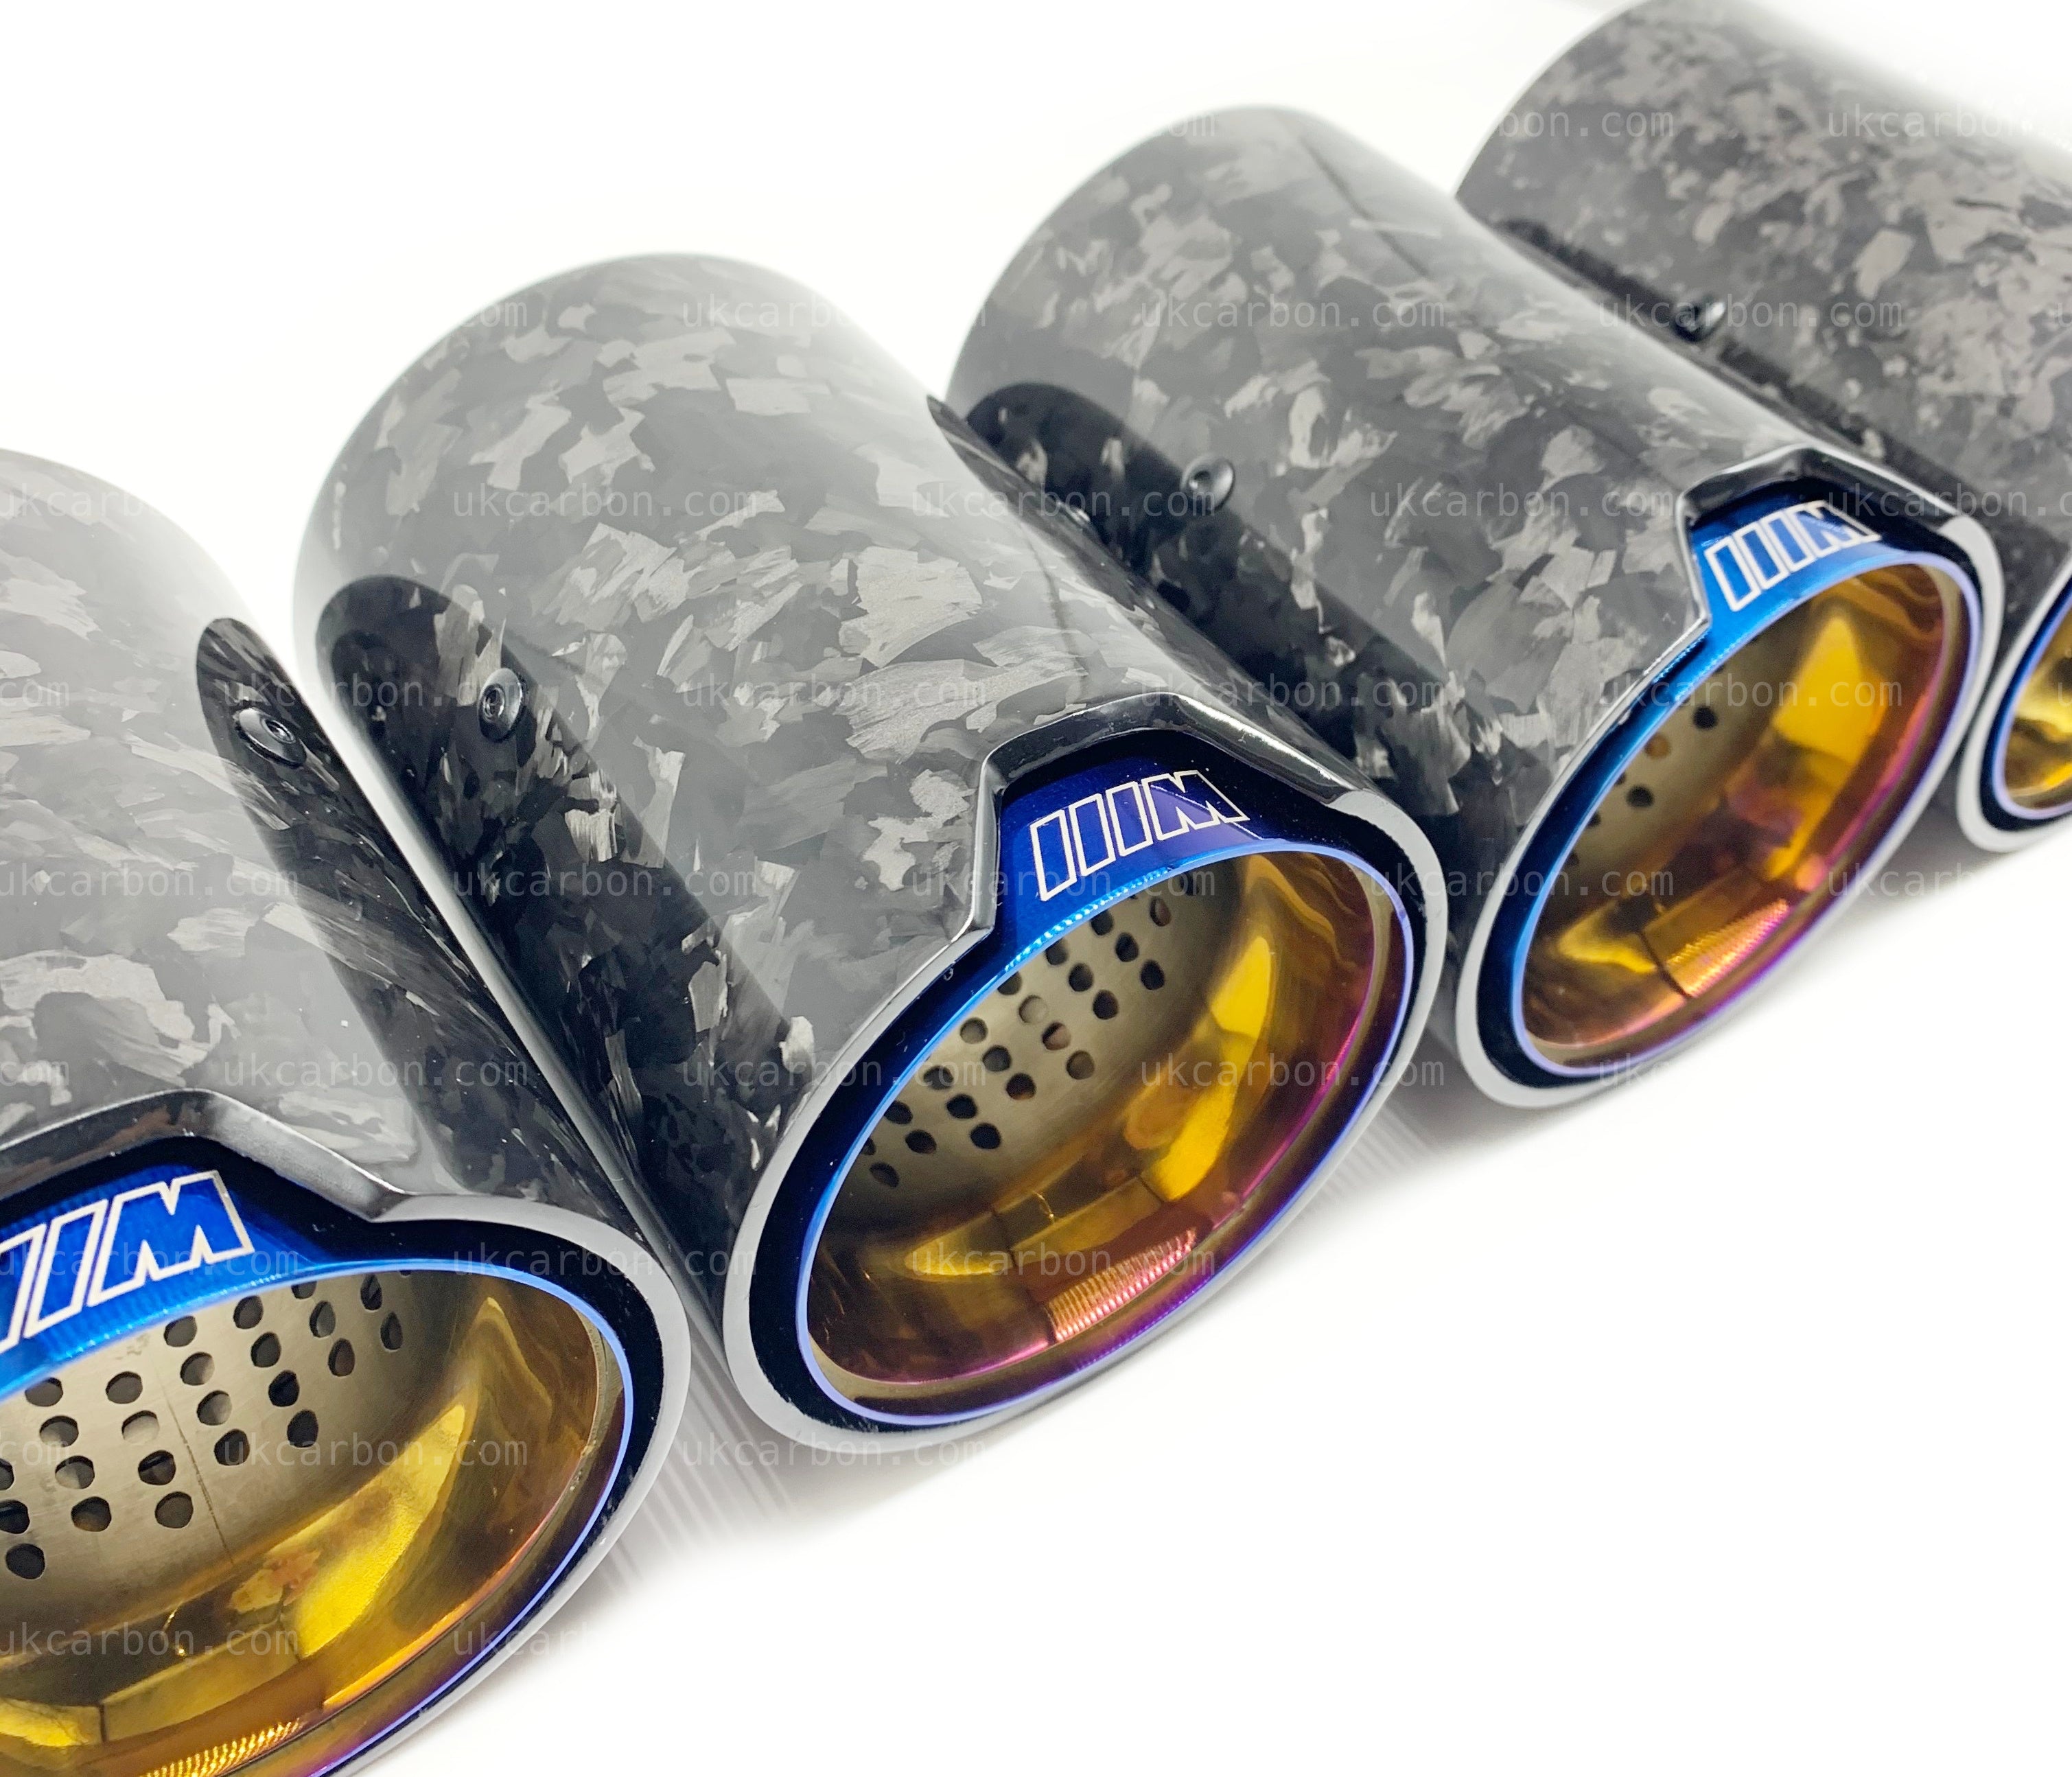 BMW M2 M3 M4 Exhaust Tips Blue Forged Carbon Fibre F87 F80 F82 F83 by UKCarbon